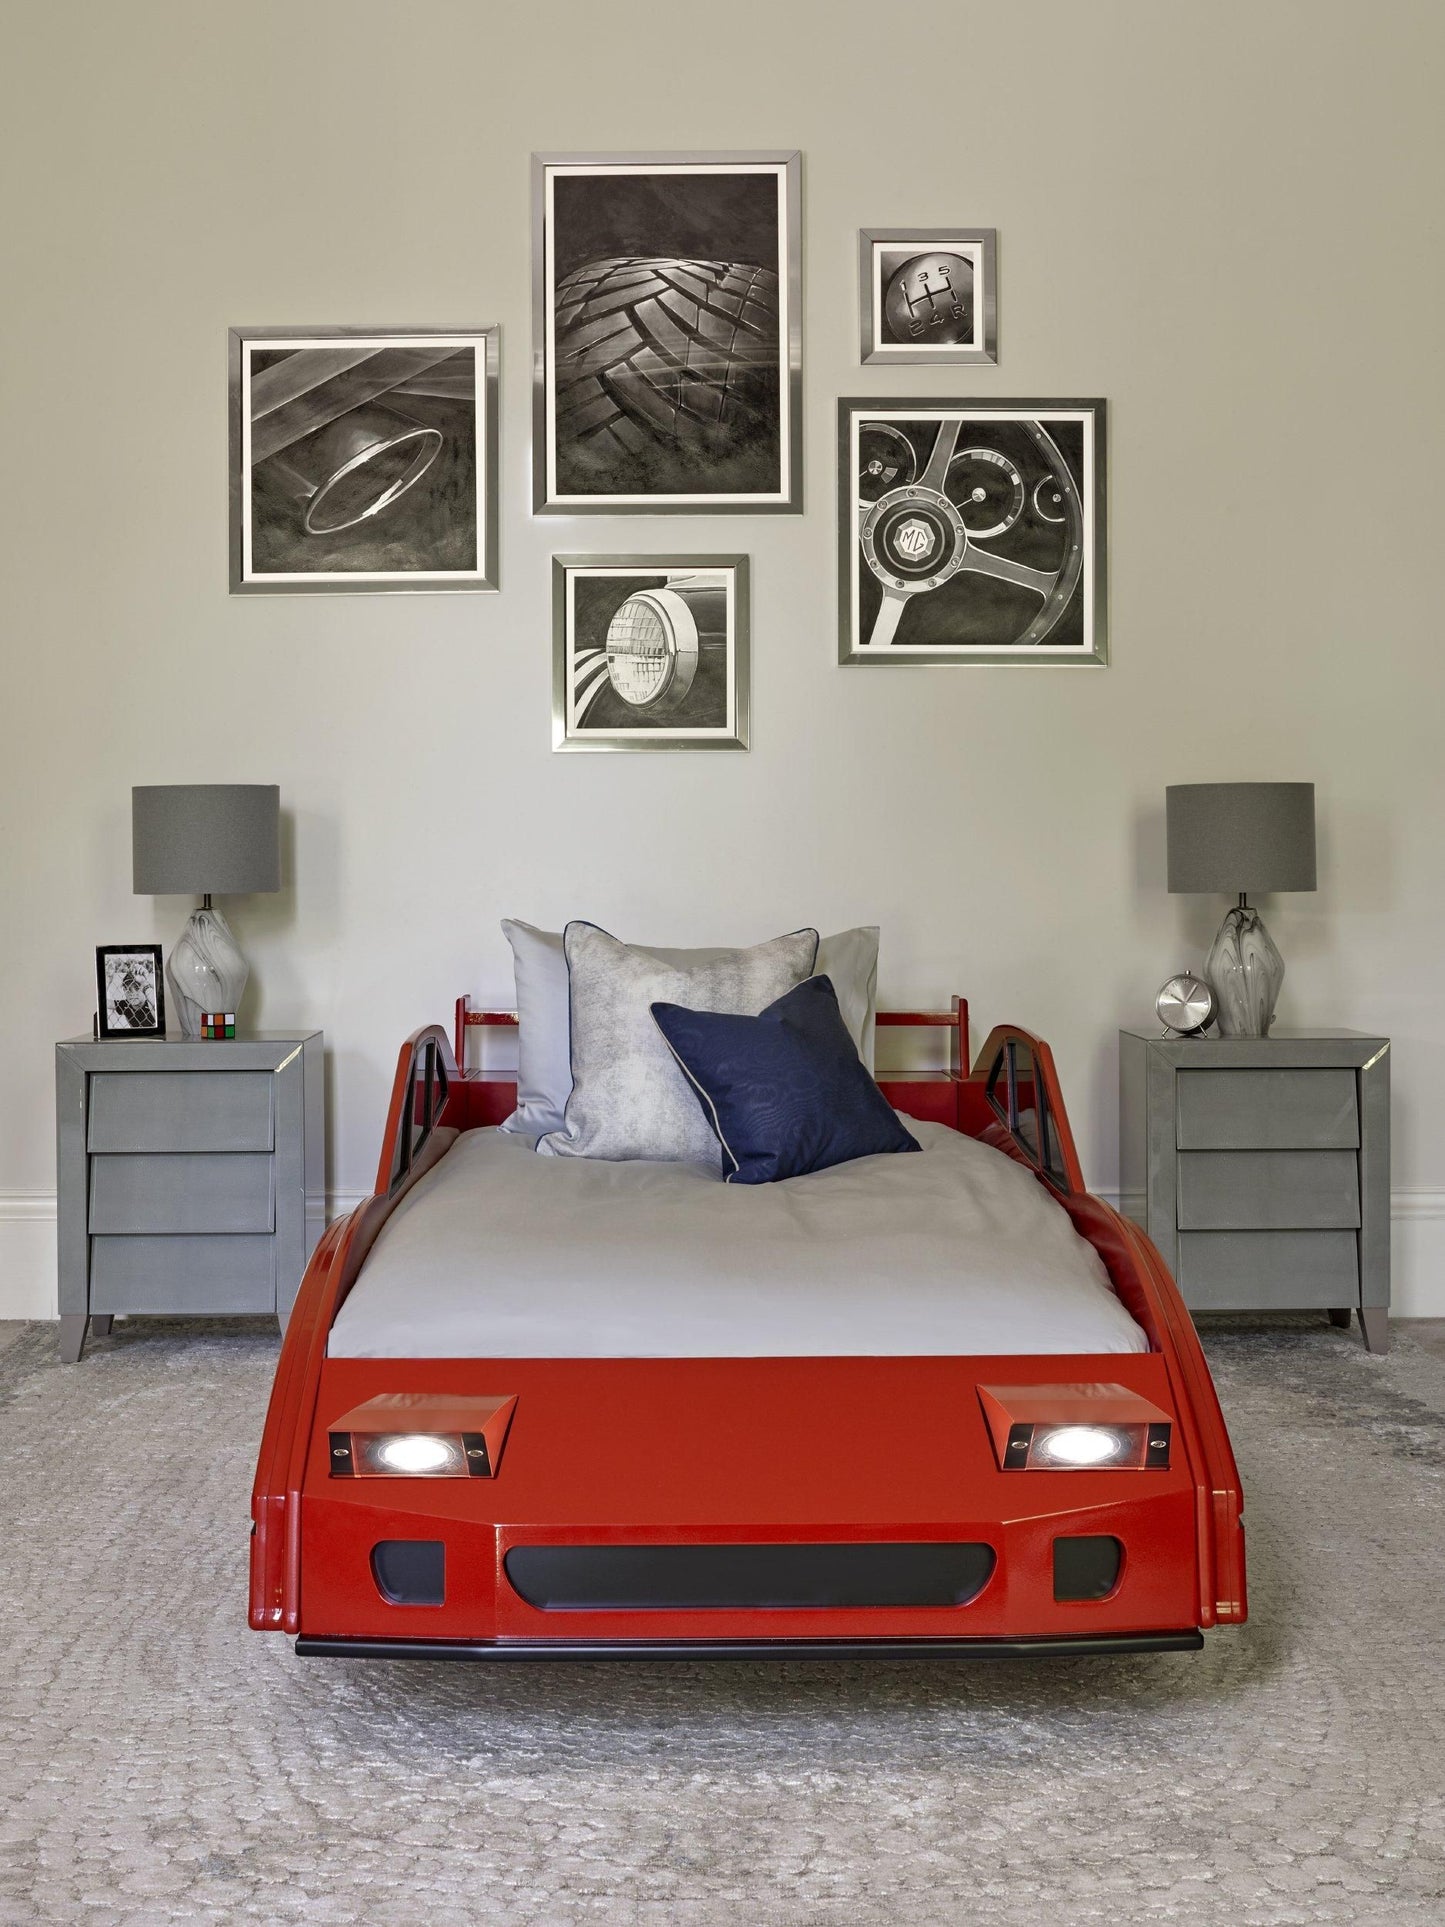 Red race car bed - Front view | Dragons of Walton Street